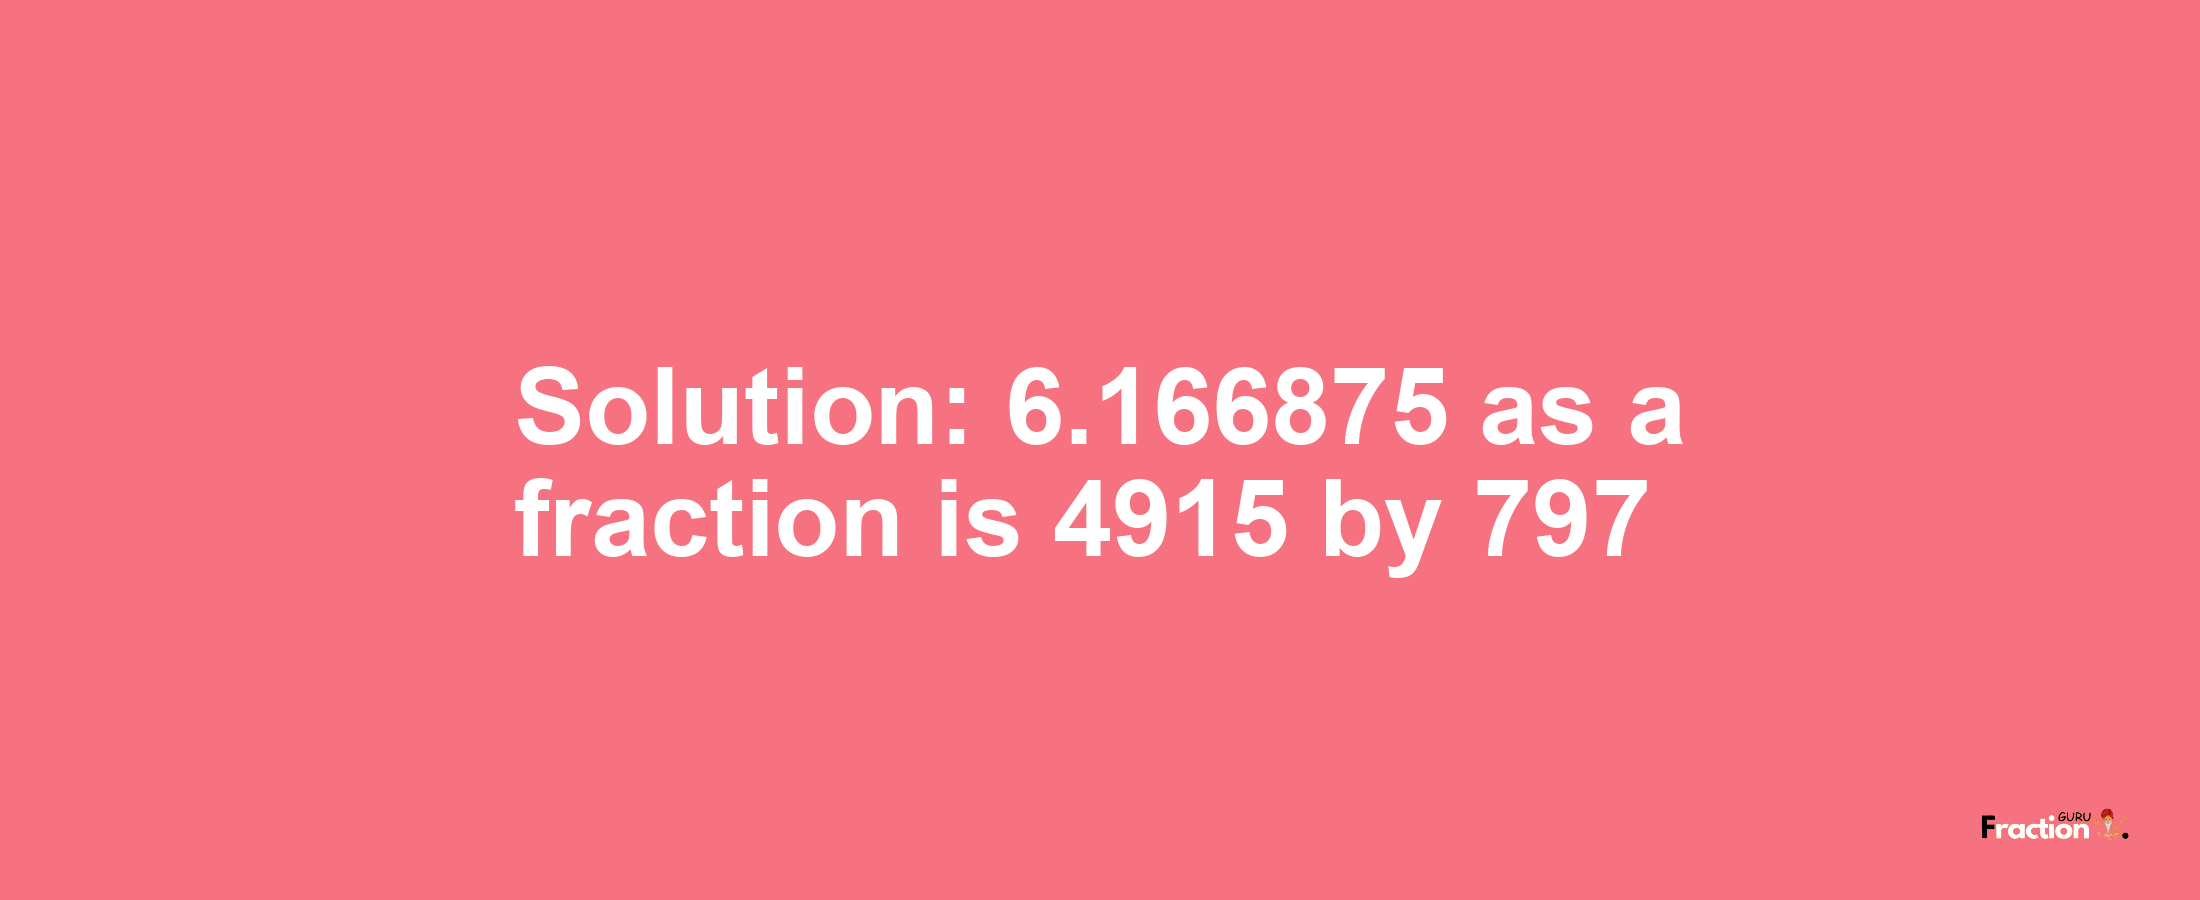 Solution:6.166875 as a fraction is 4915/797